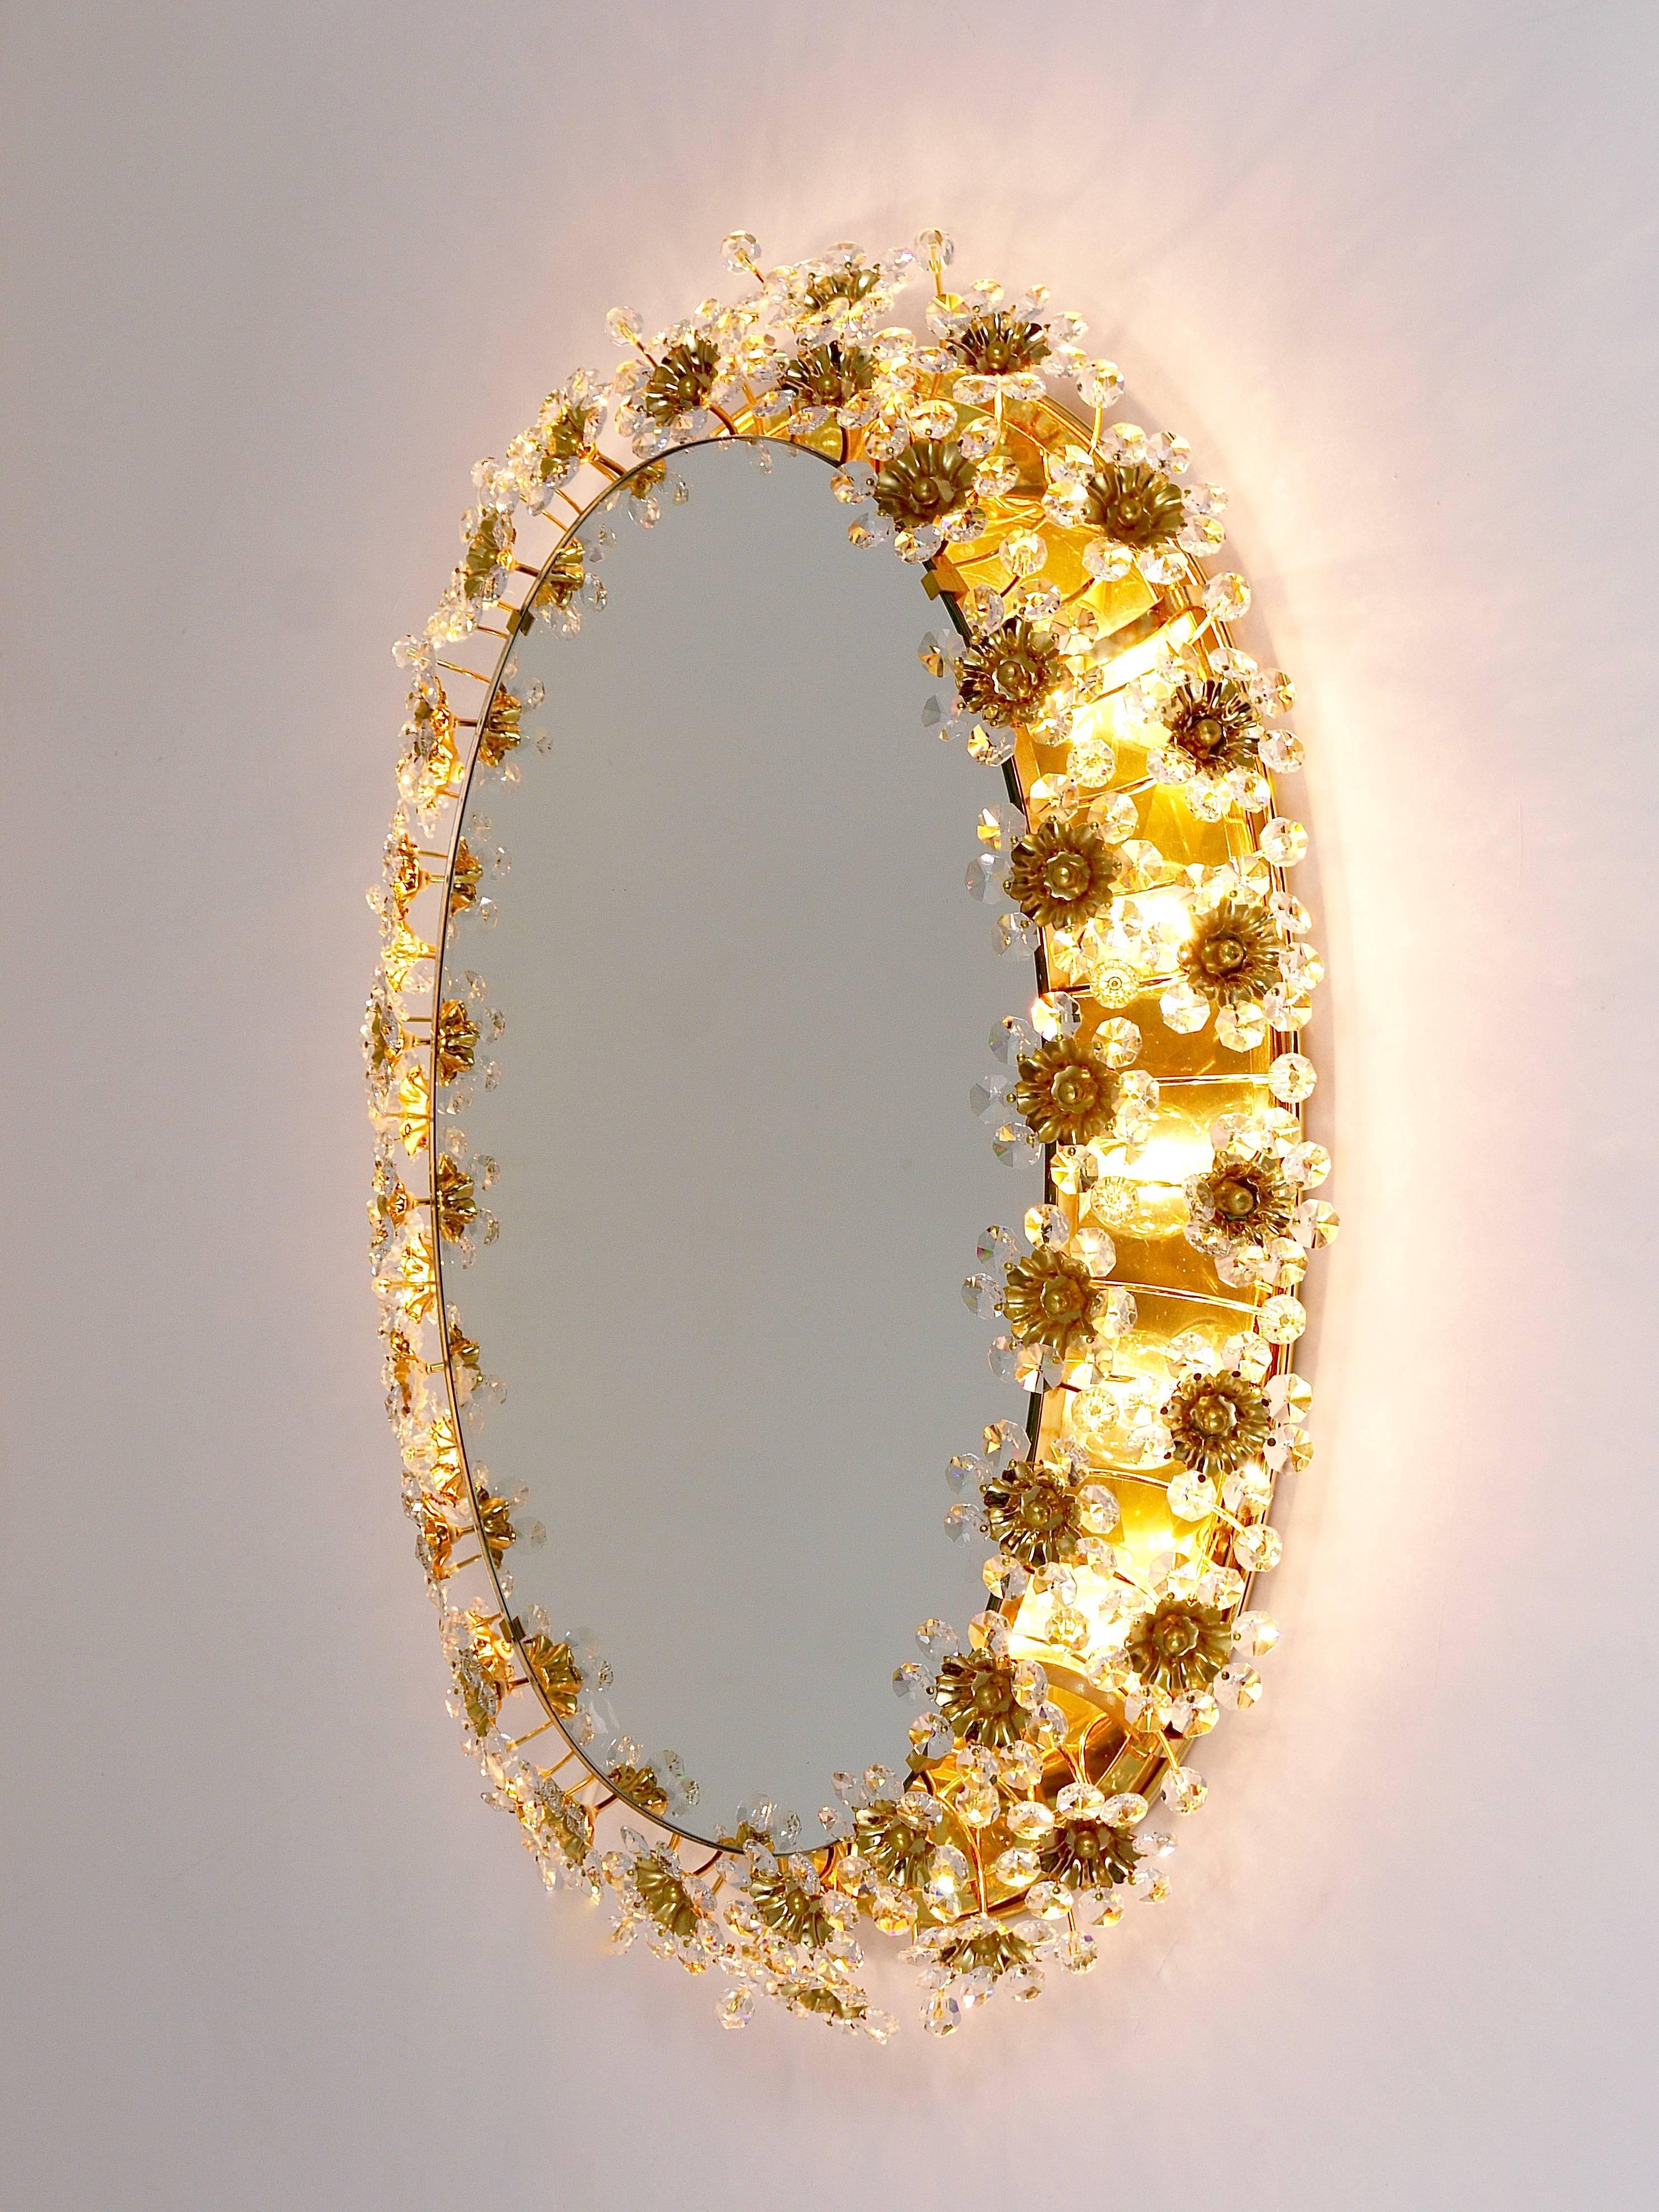 A beautiful oval floral illuminated wall mirror, manufactured in the 1970s by Palwa Germany. Handcrafted frame, made of gold-plated brass, covered with jewel like faceted crystal glass petals. Has ten-light sources. In excellent condition. Please